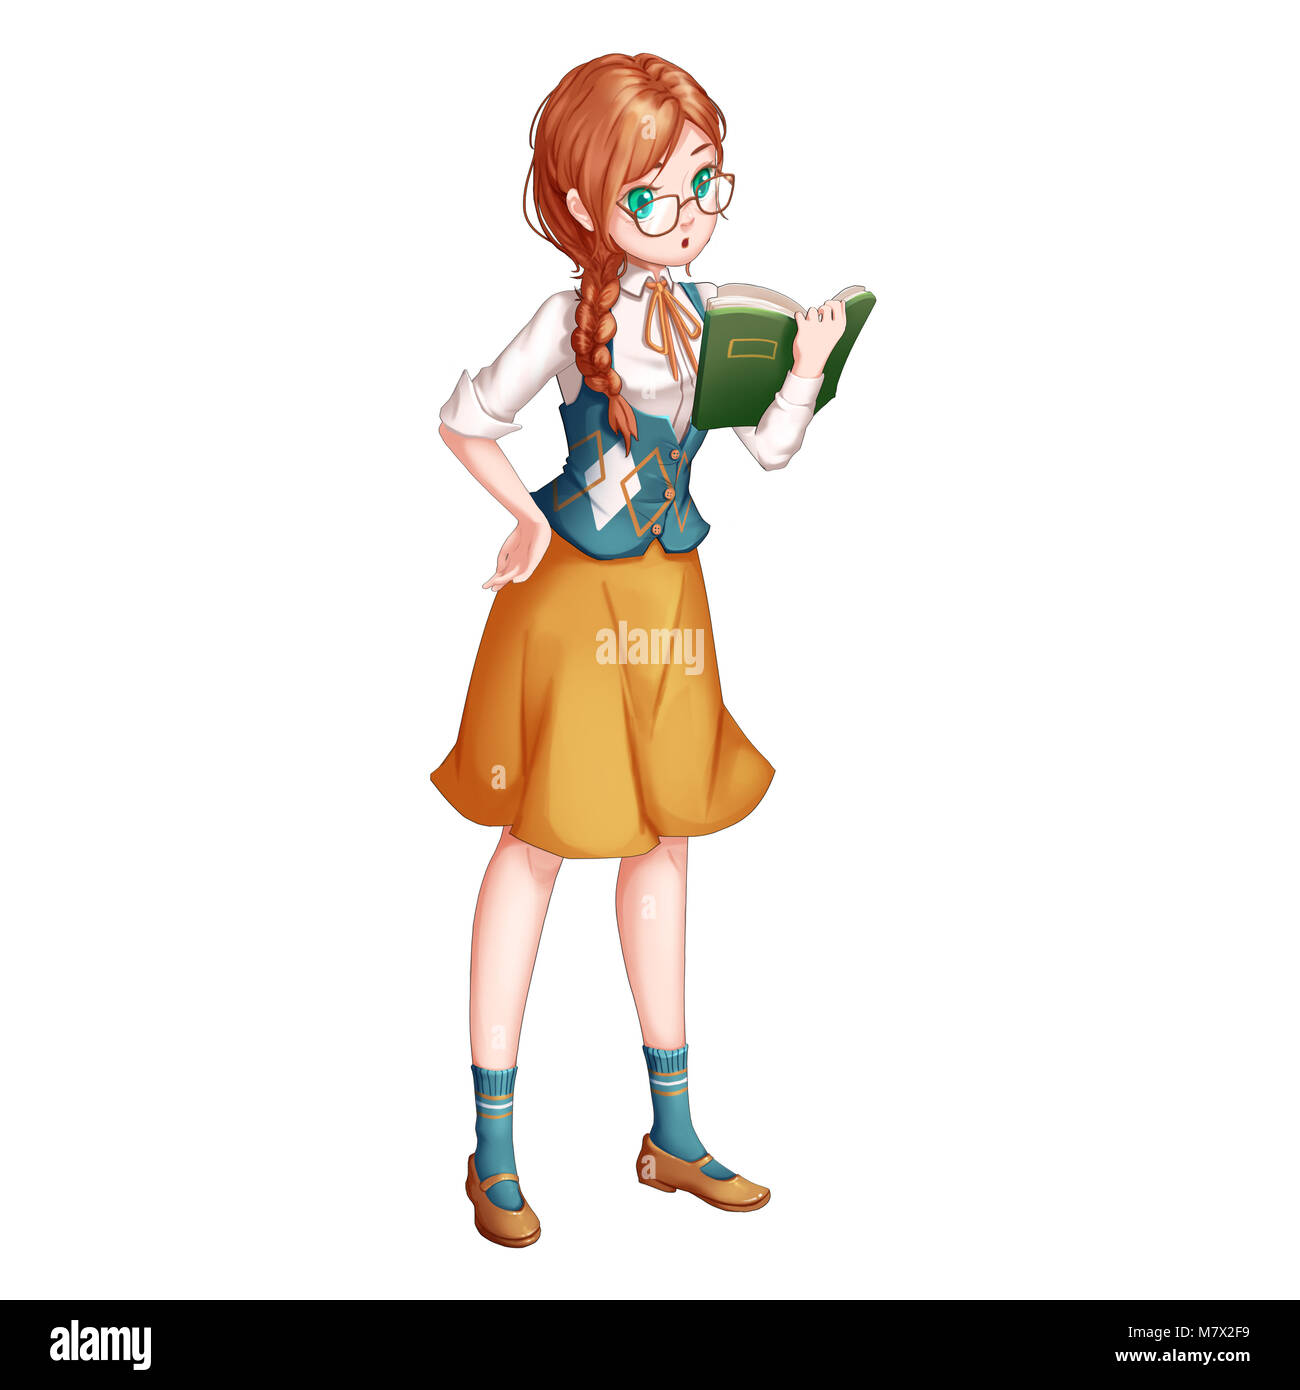 Magic Girl with Anime and Cartoon Style. Video Game's Digital CG Artwork,  Concept Illustration, Realistic Cartoon Style Character Design Stock Photo  - Alamy